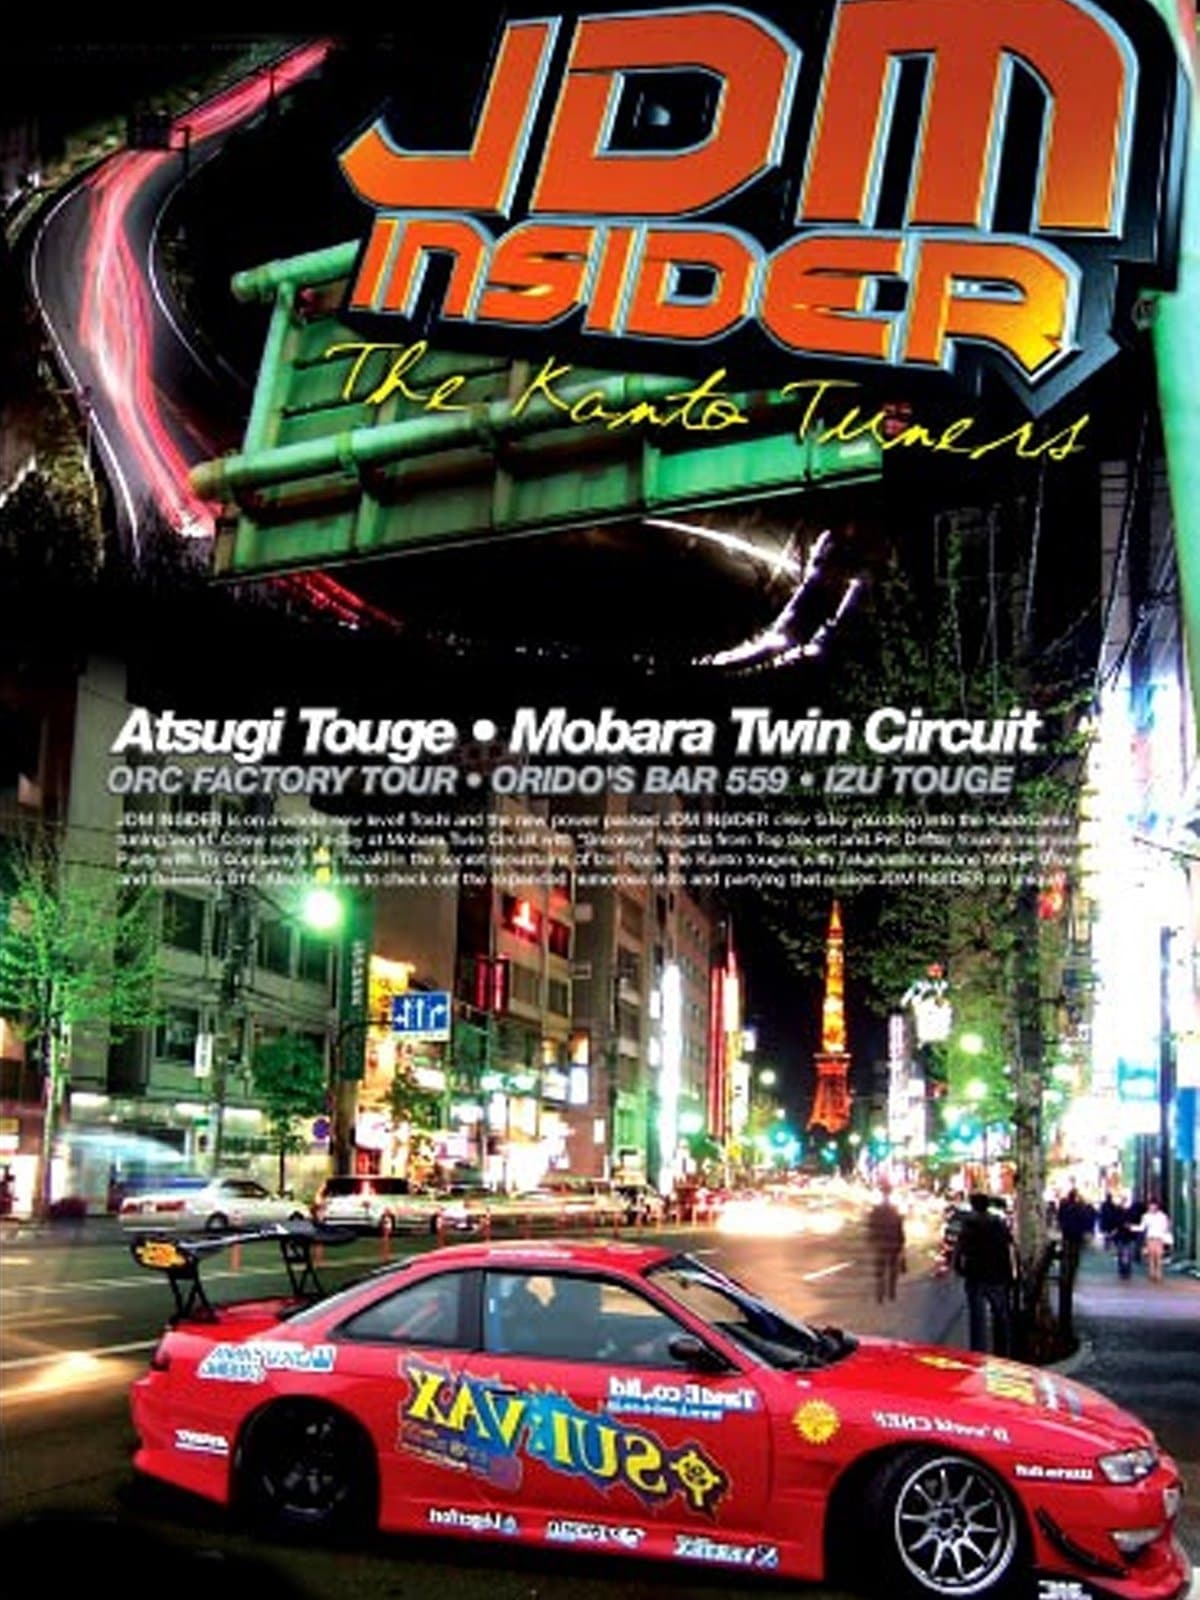 JDM Insider vol 4: The Kanto Tuners